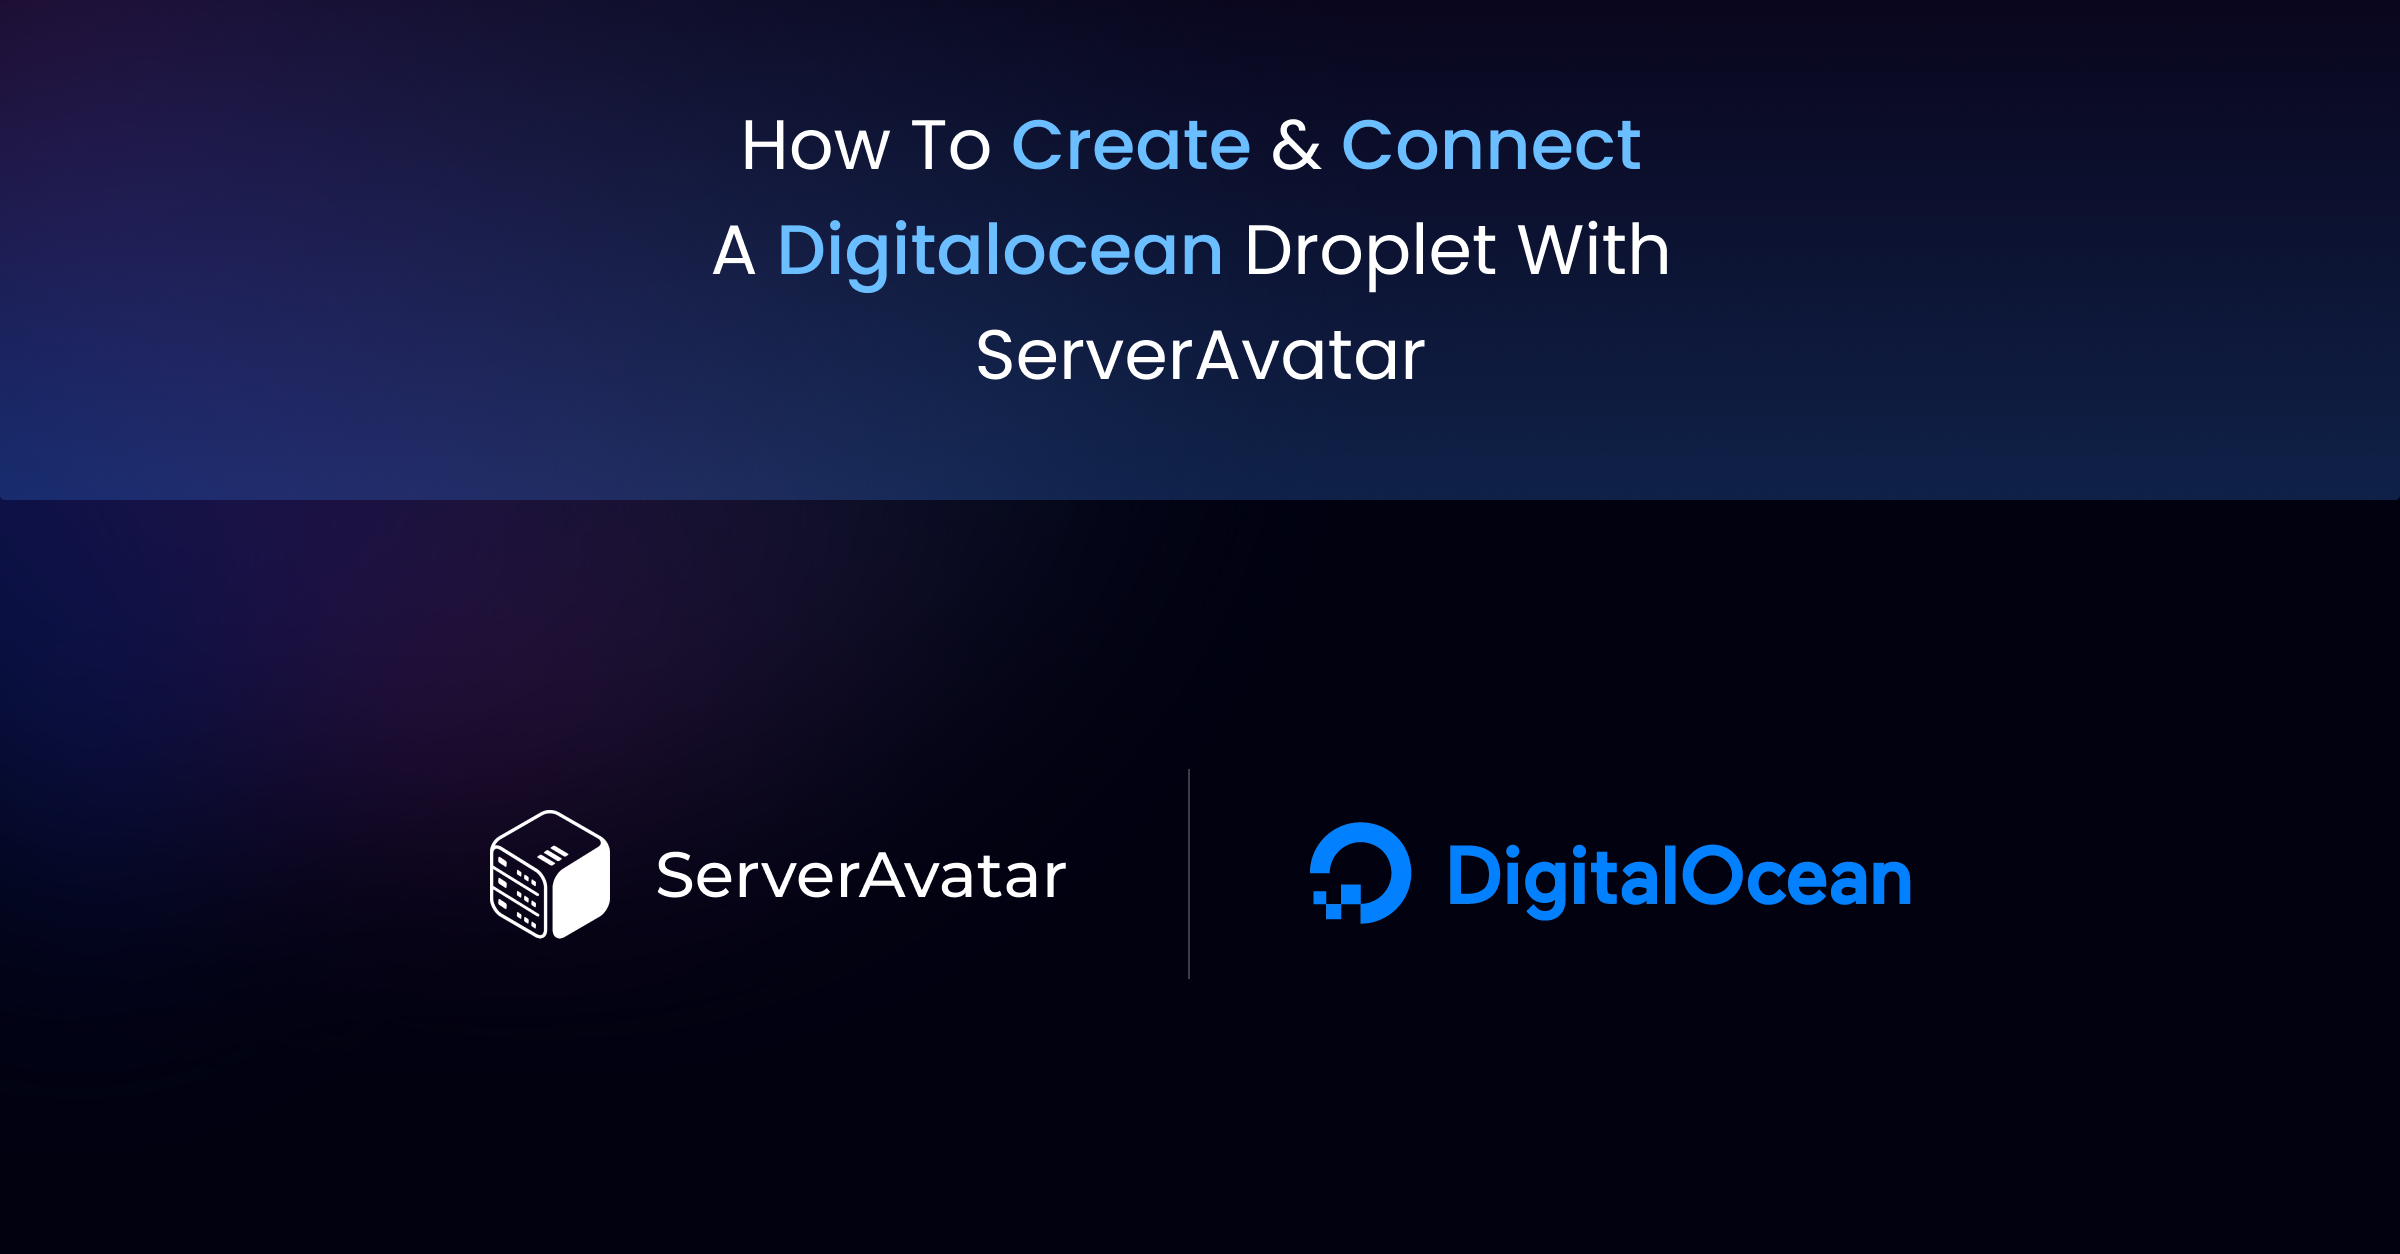 How to Create & Connect a Digitalocean droplet with ServerAvatar